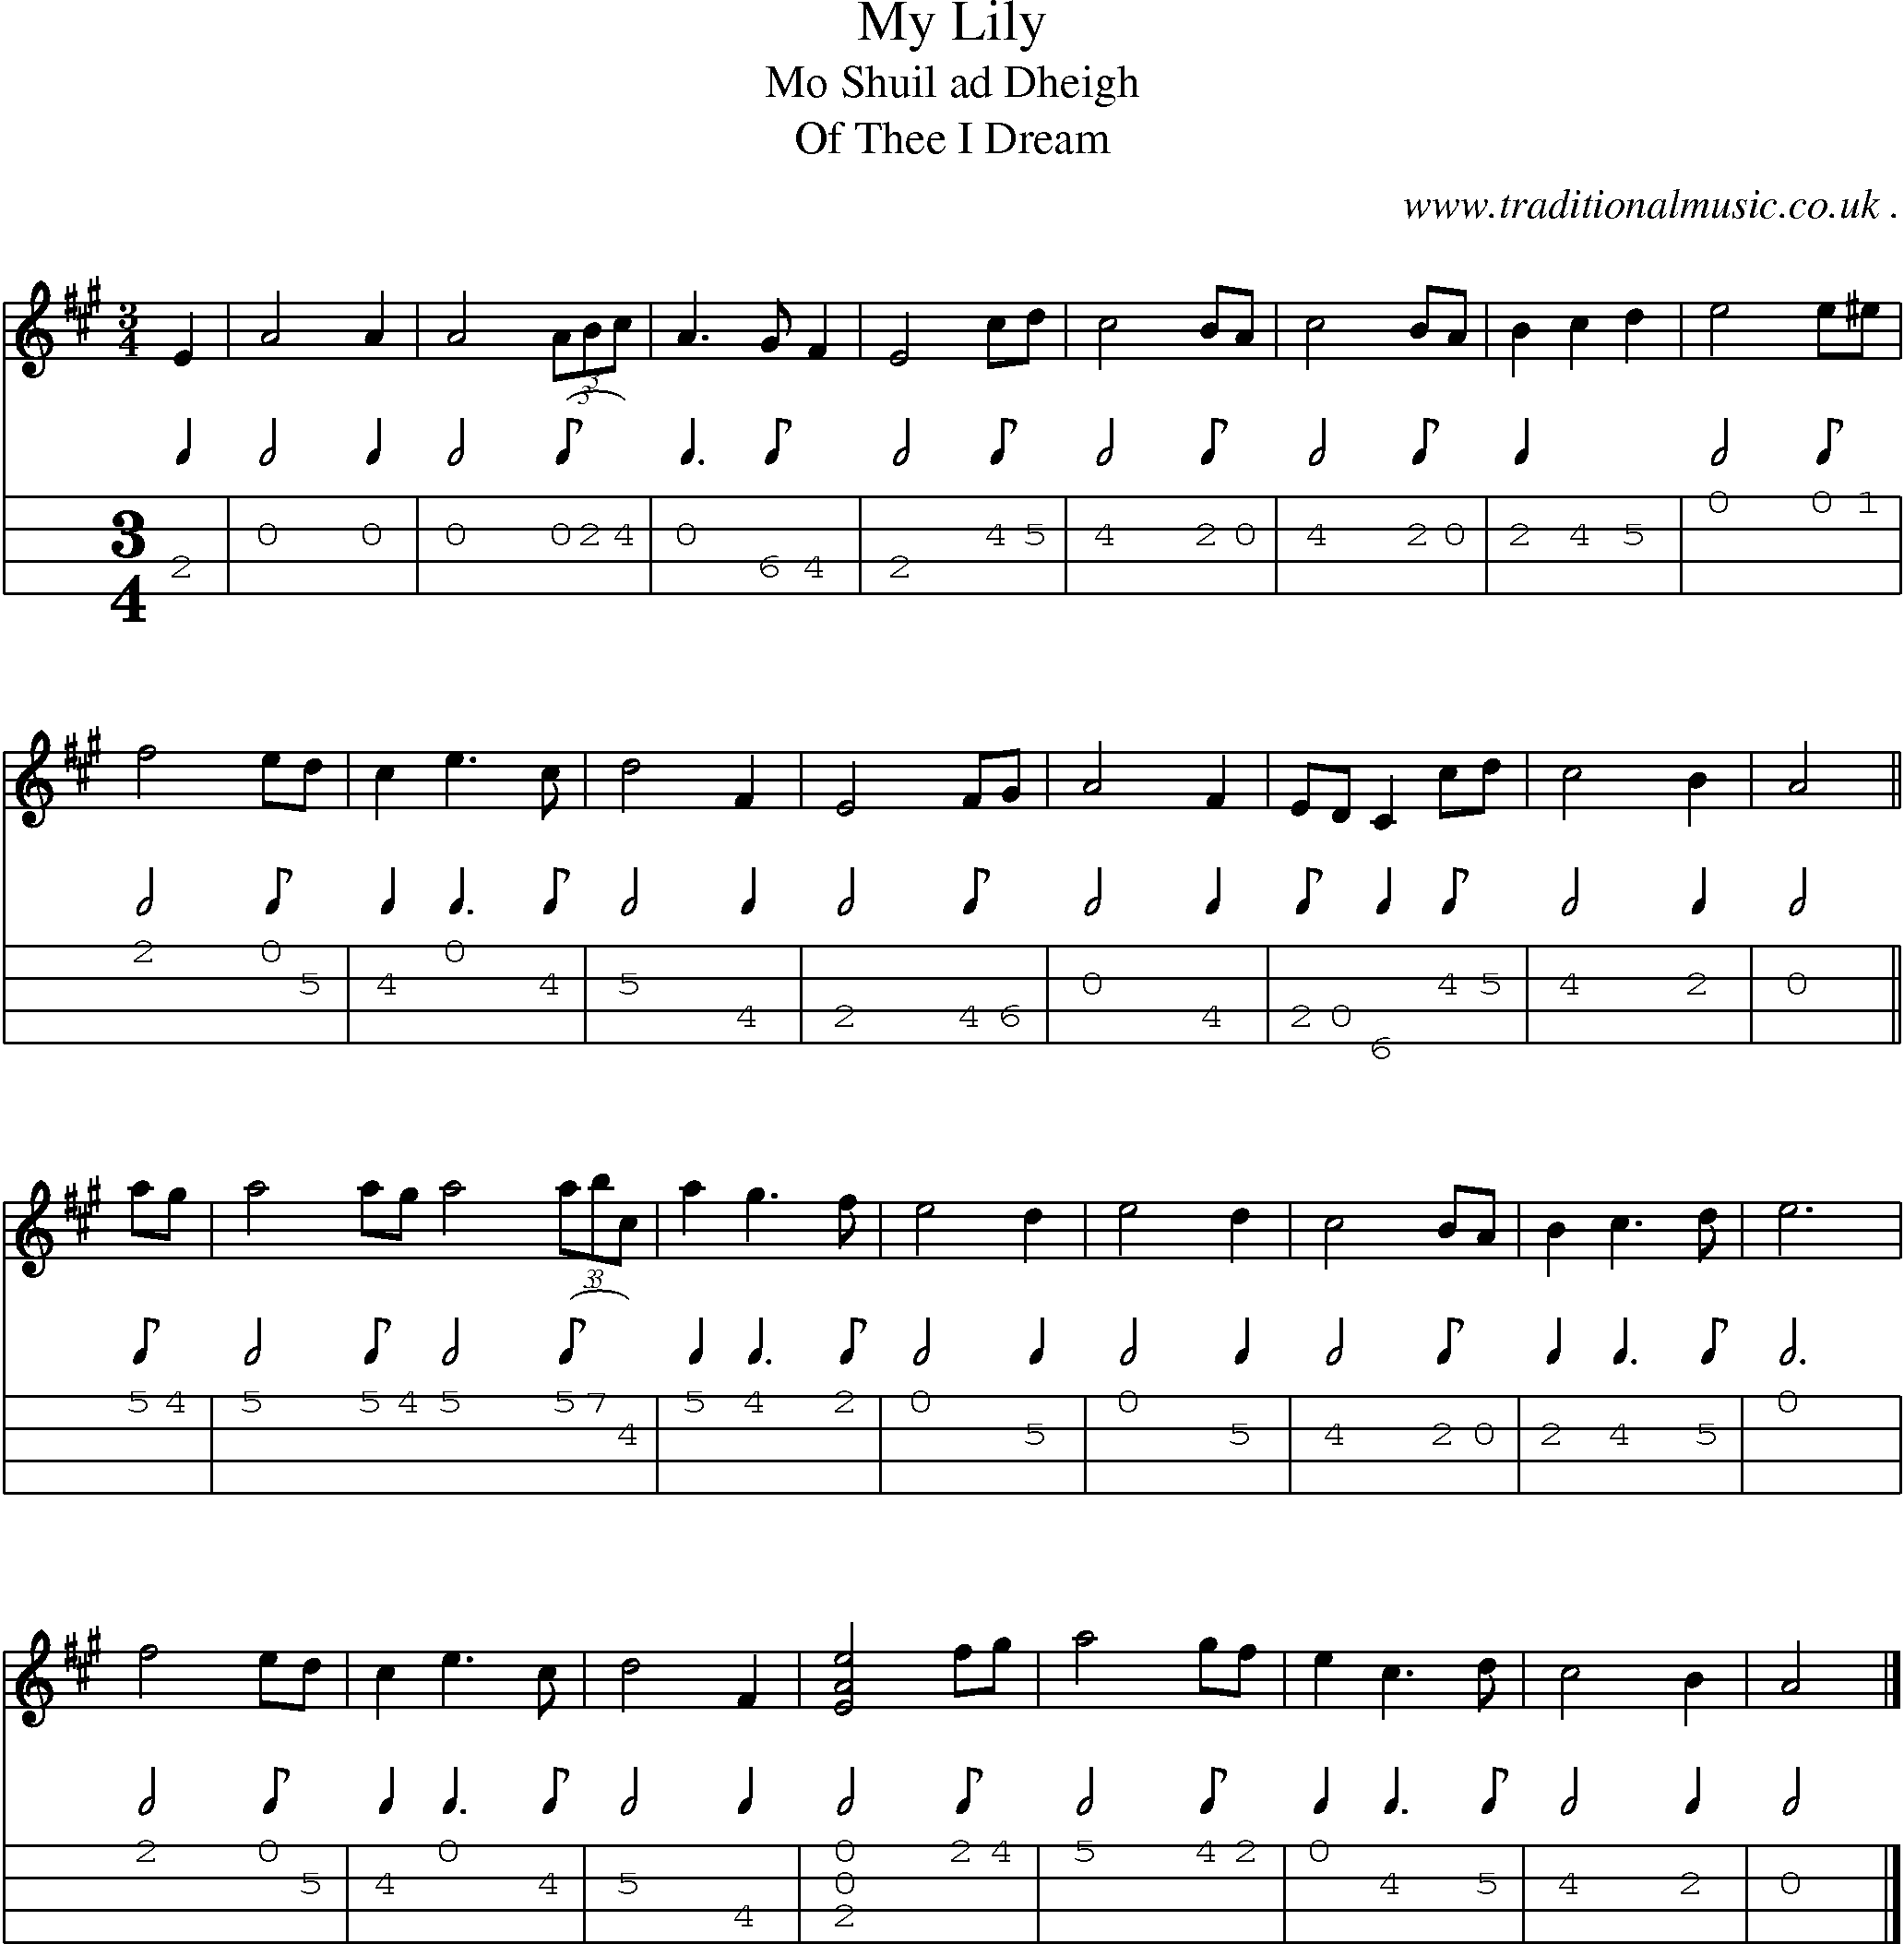 Sheet-music  score, Chords and Mandolin Tabs for My Lily